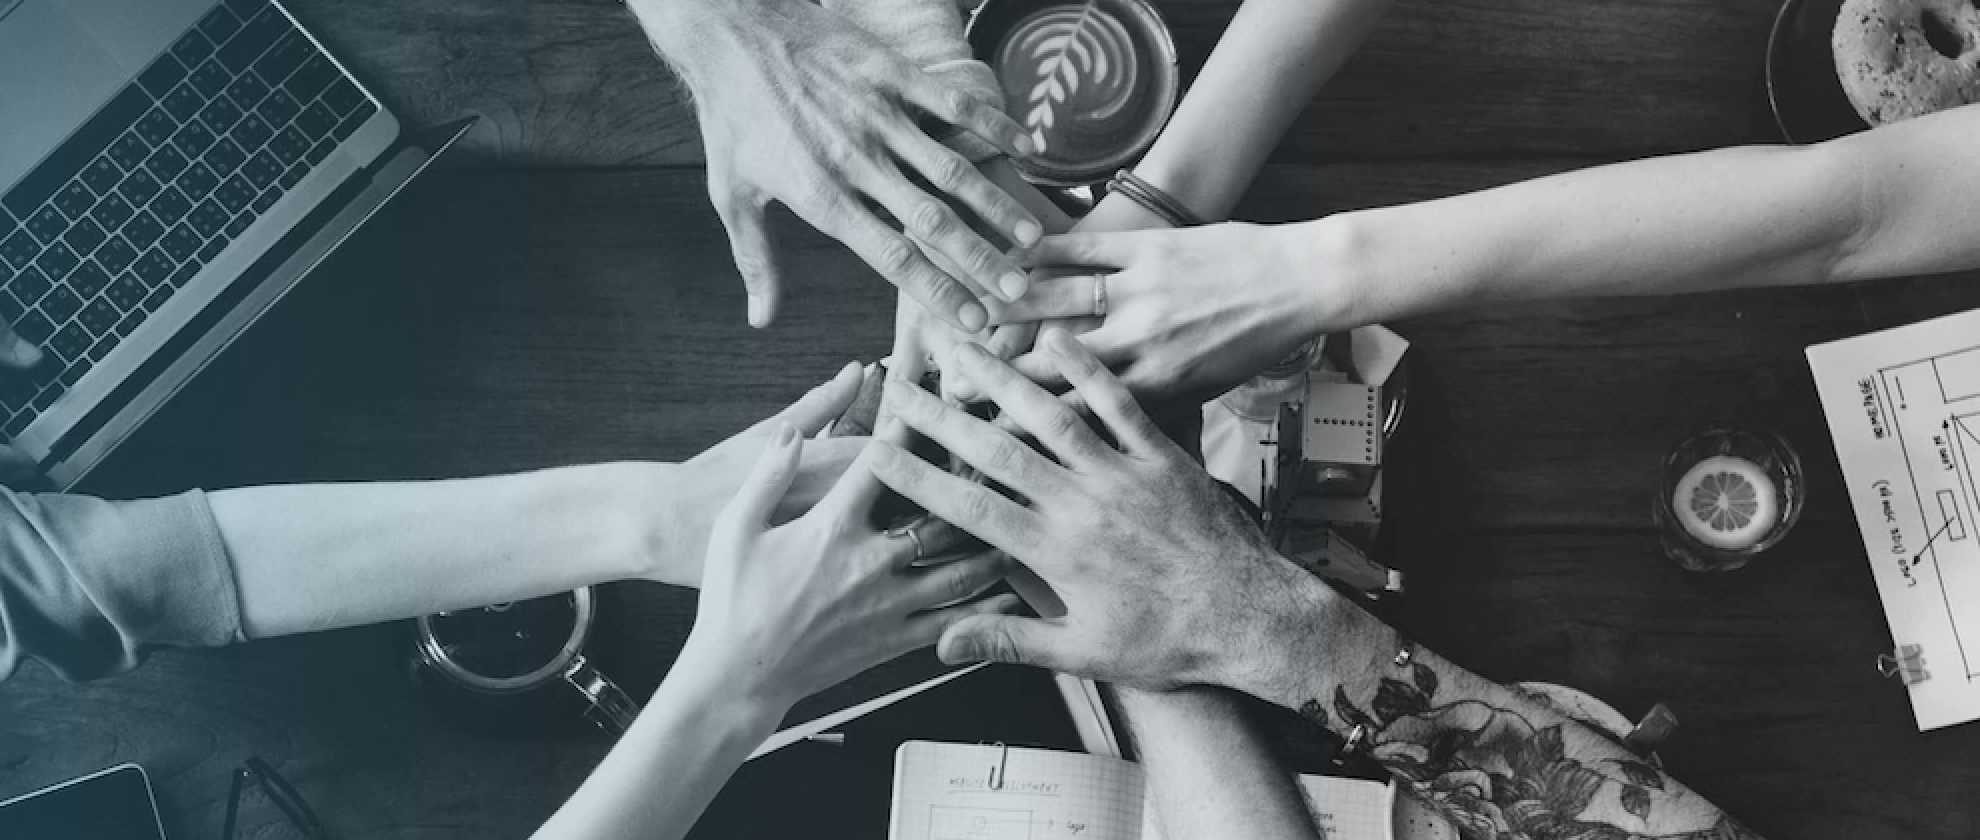 Greyscale image of hands-in/team huddle over an office desktop